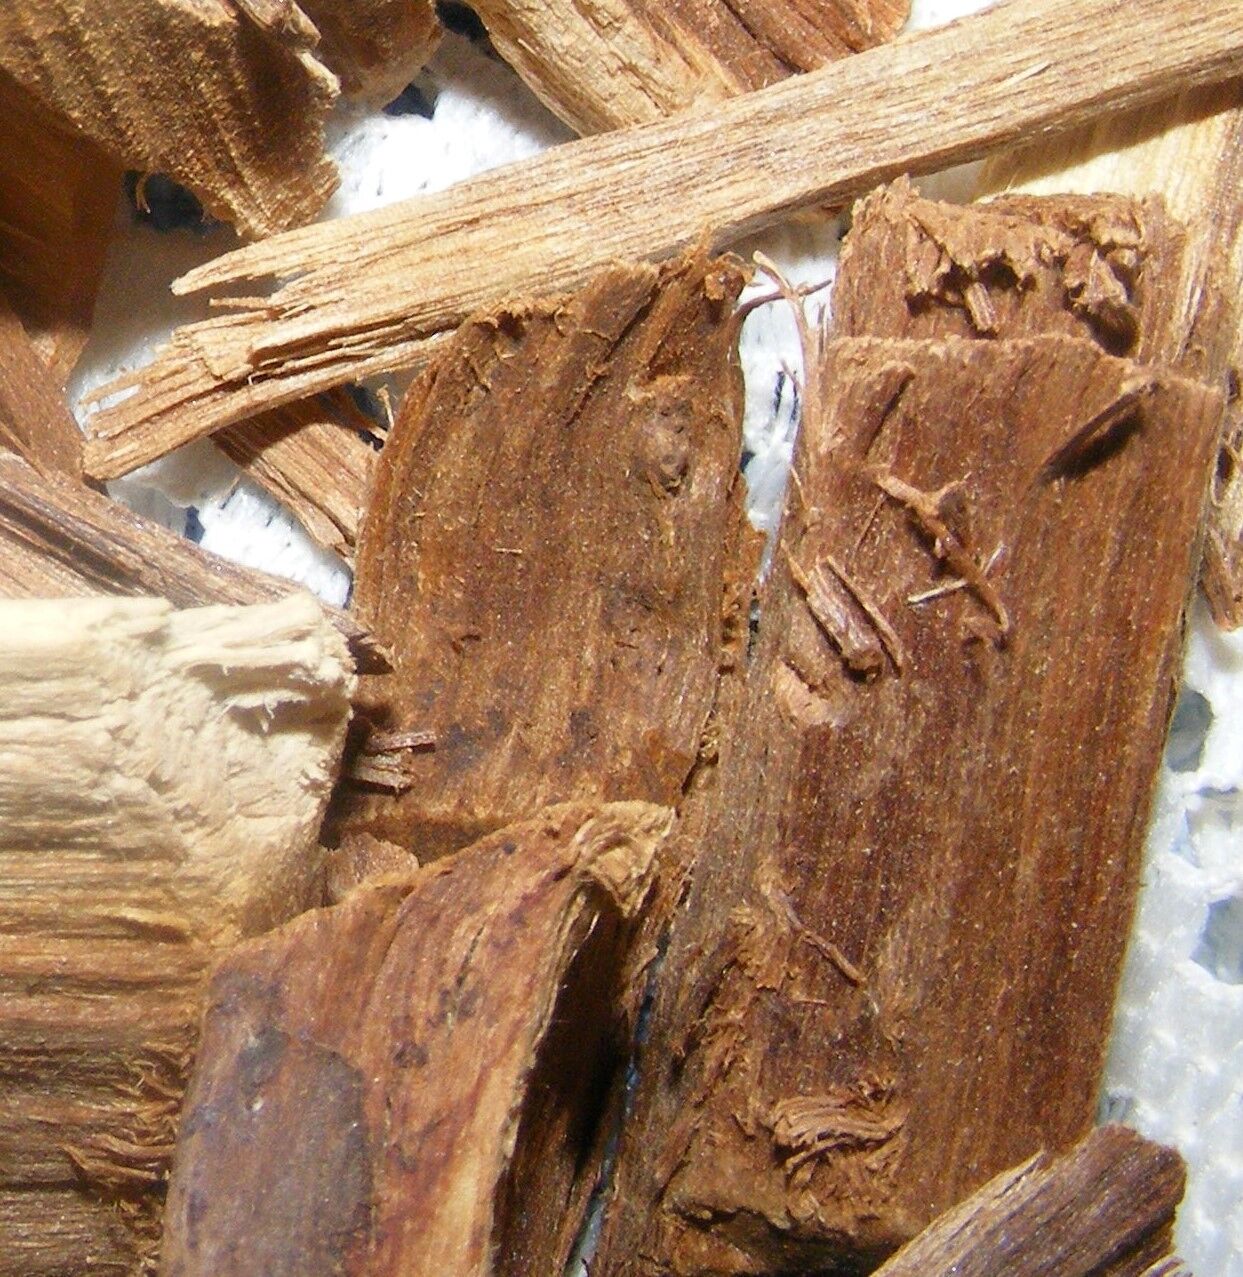 PALO AZUL (BLUE STICK) or KIDNEY WOOD - Famous Detox Herbal Remedy